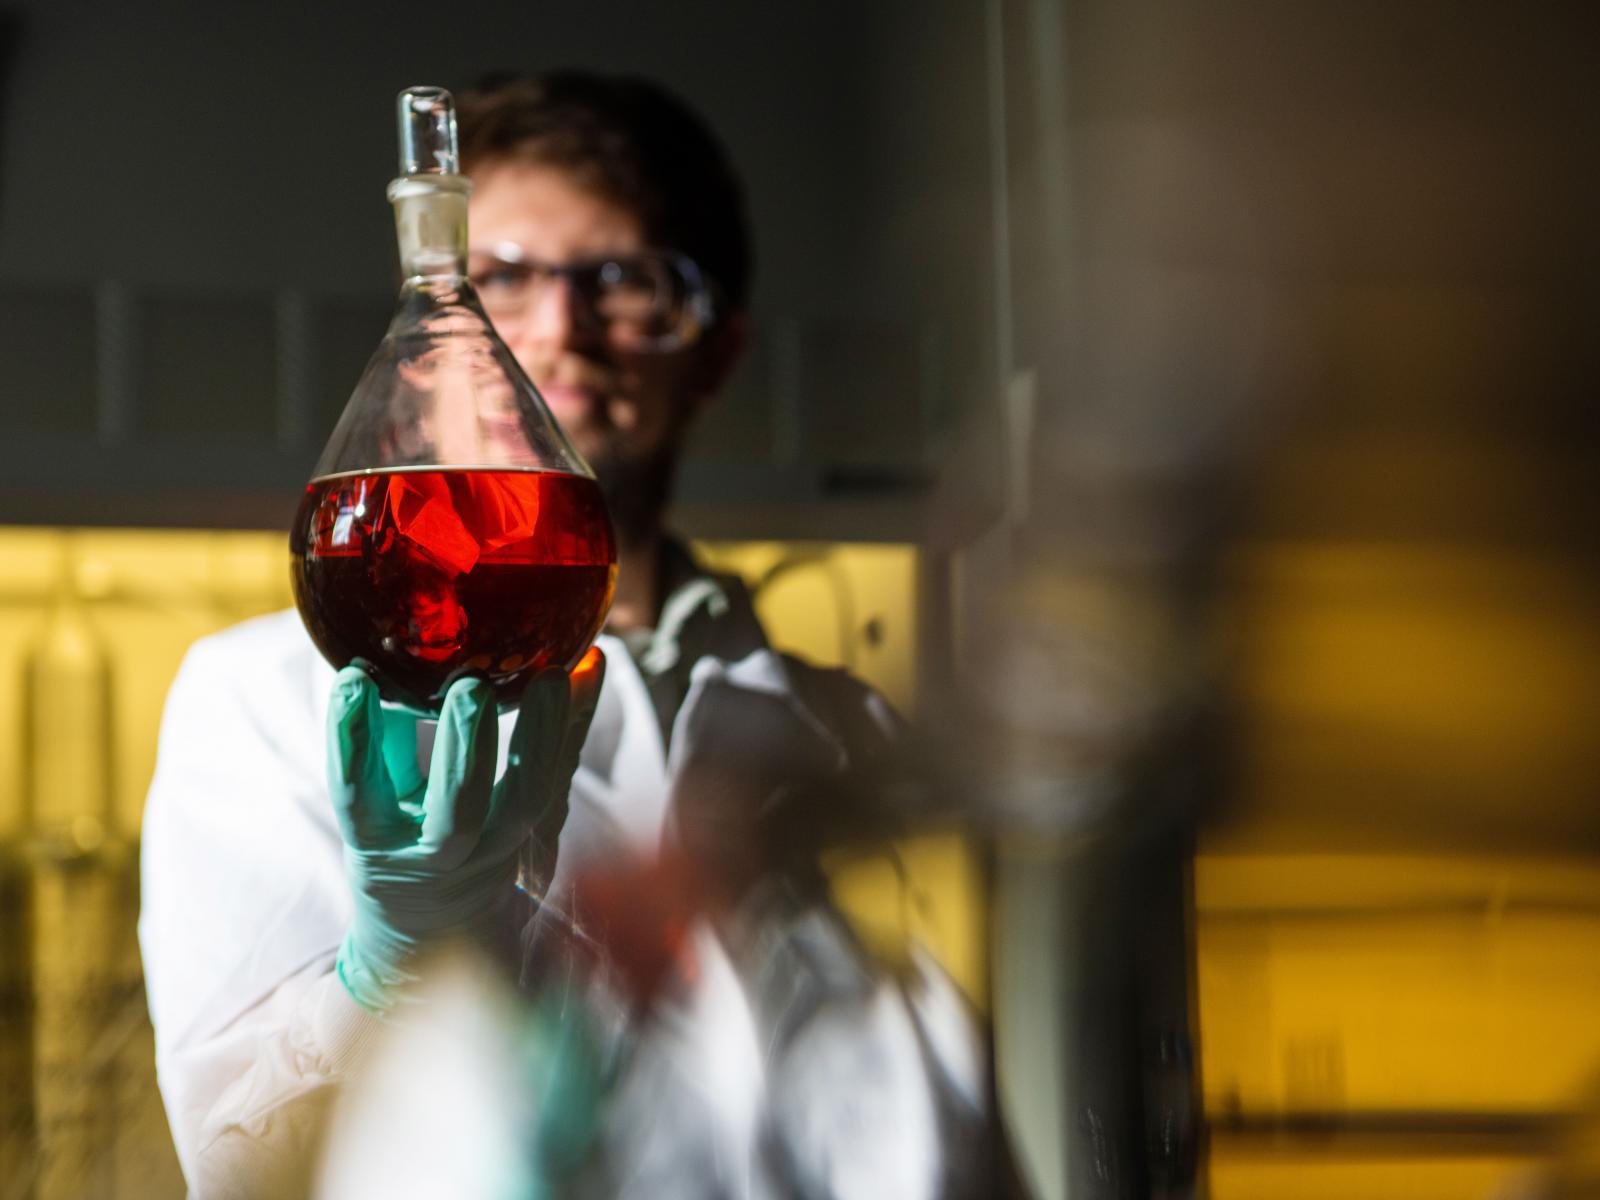 Picture of a researcher holding a large flask filled with red liquid